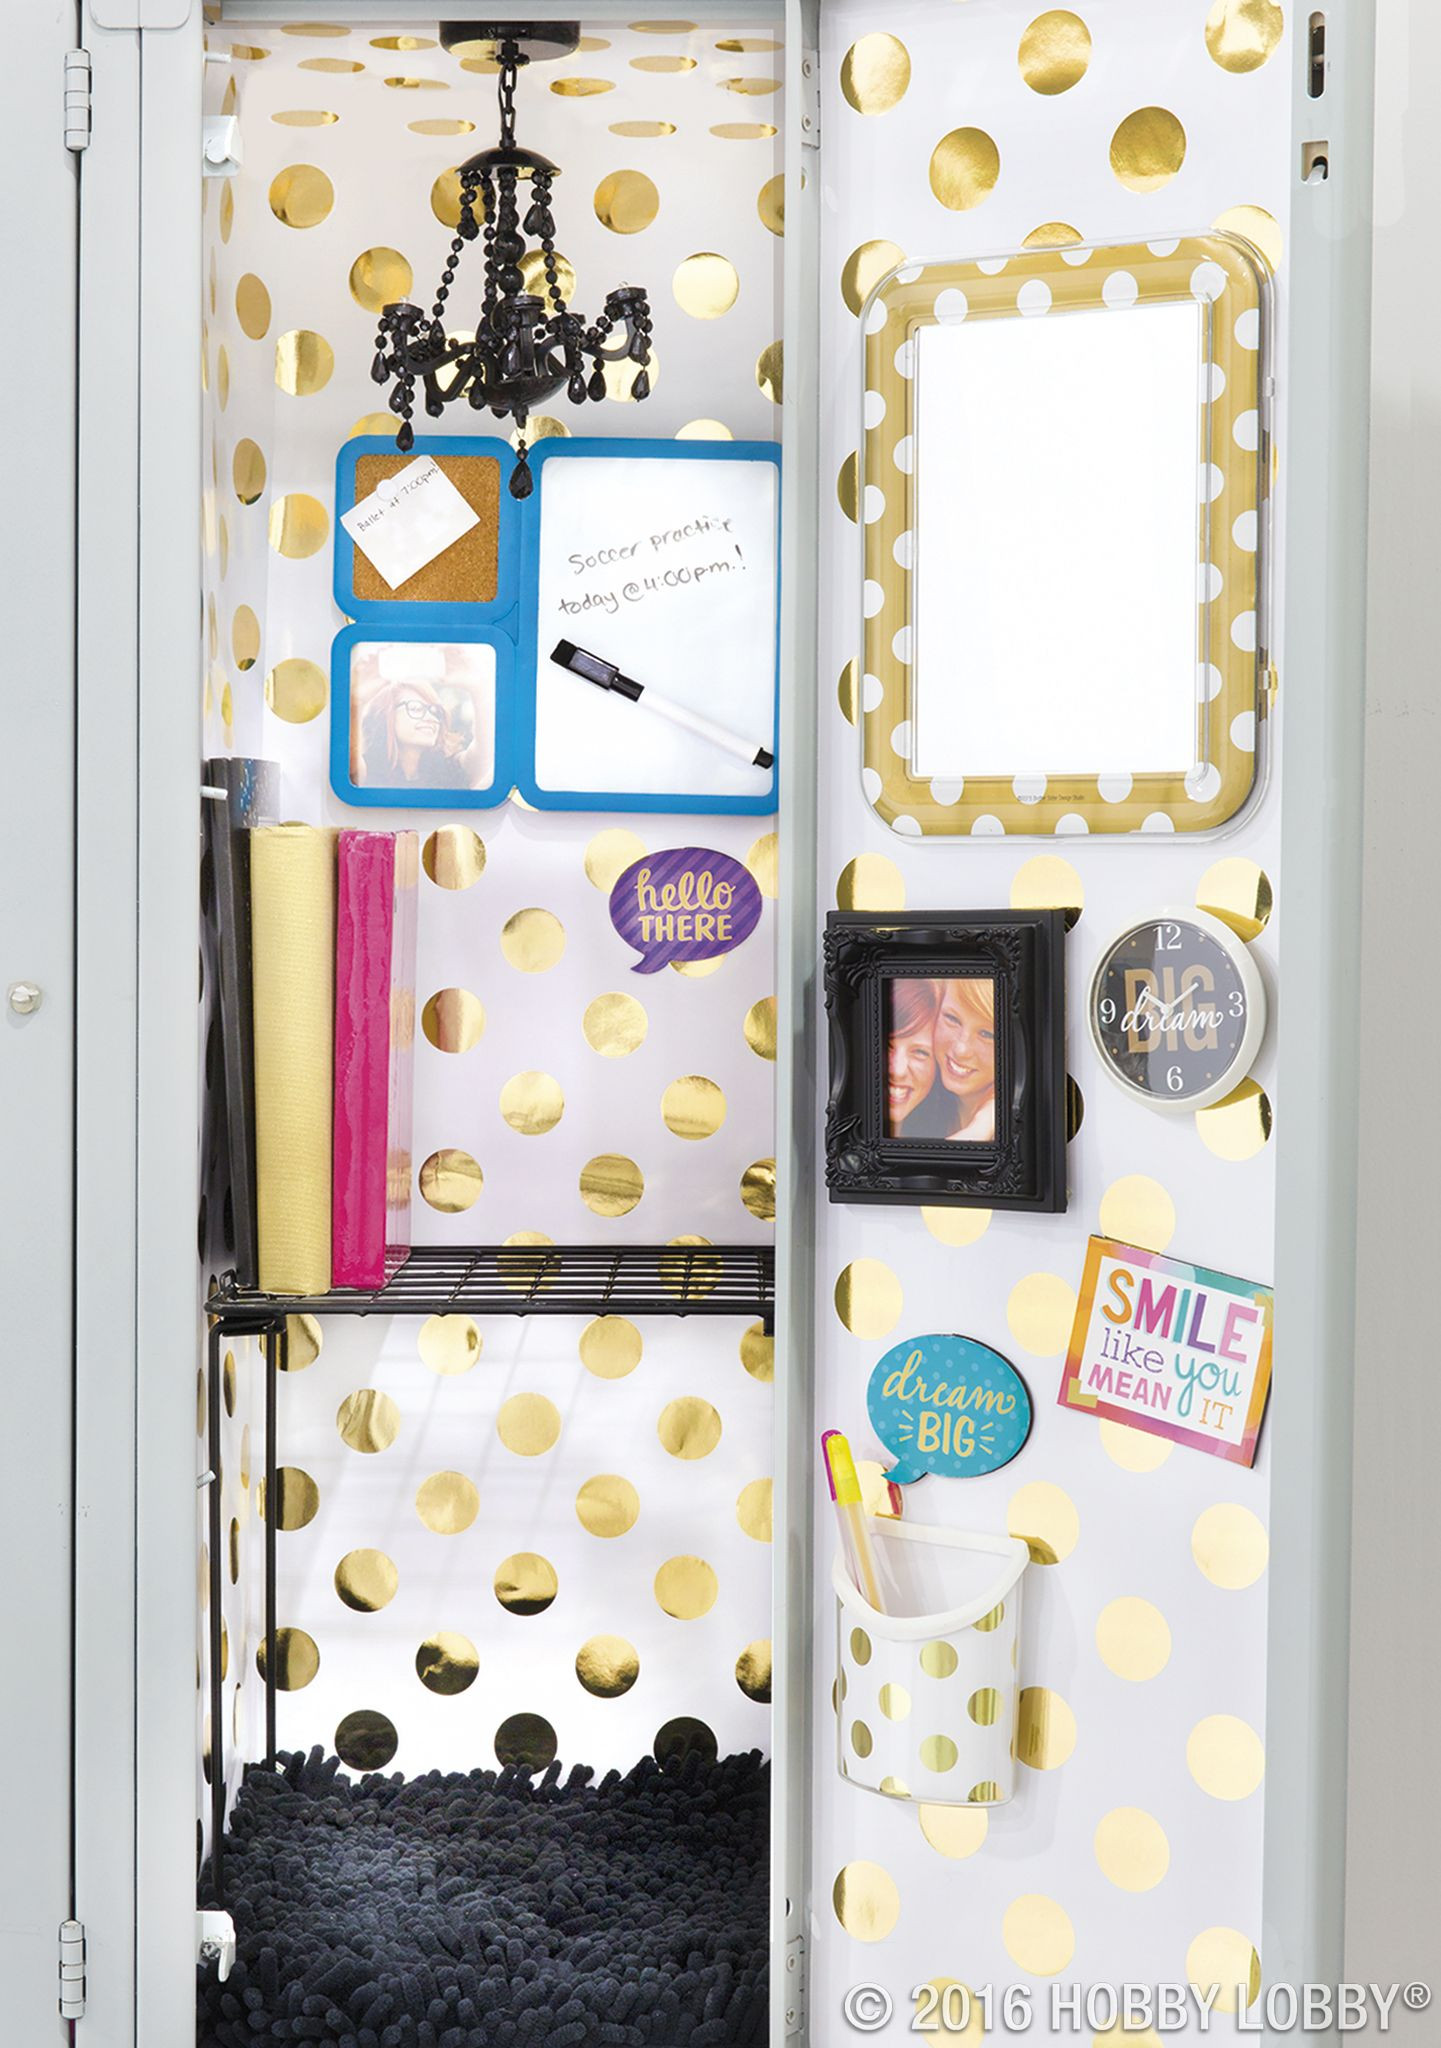 DIY Locker Decorations With Household Items
 Pack your locker full of personality with fun and